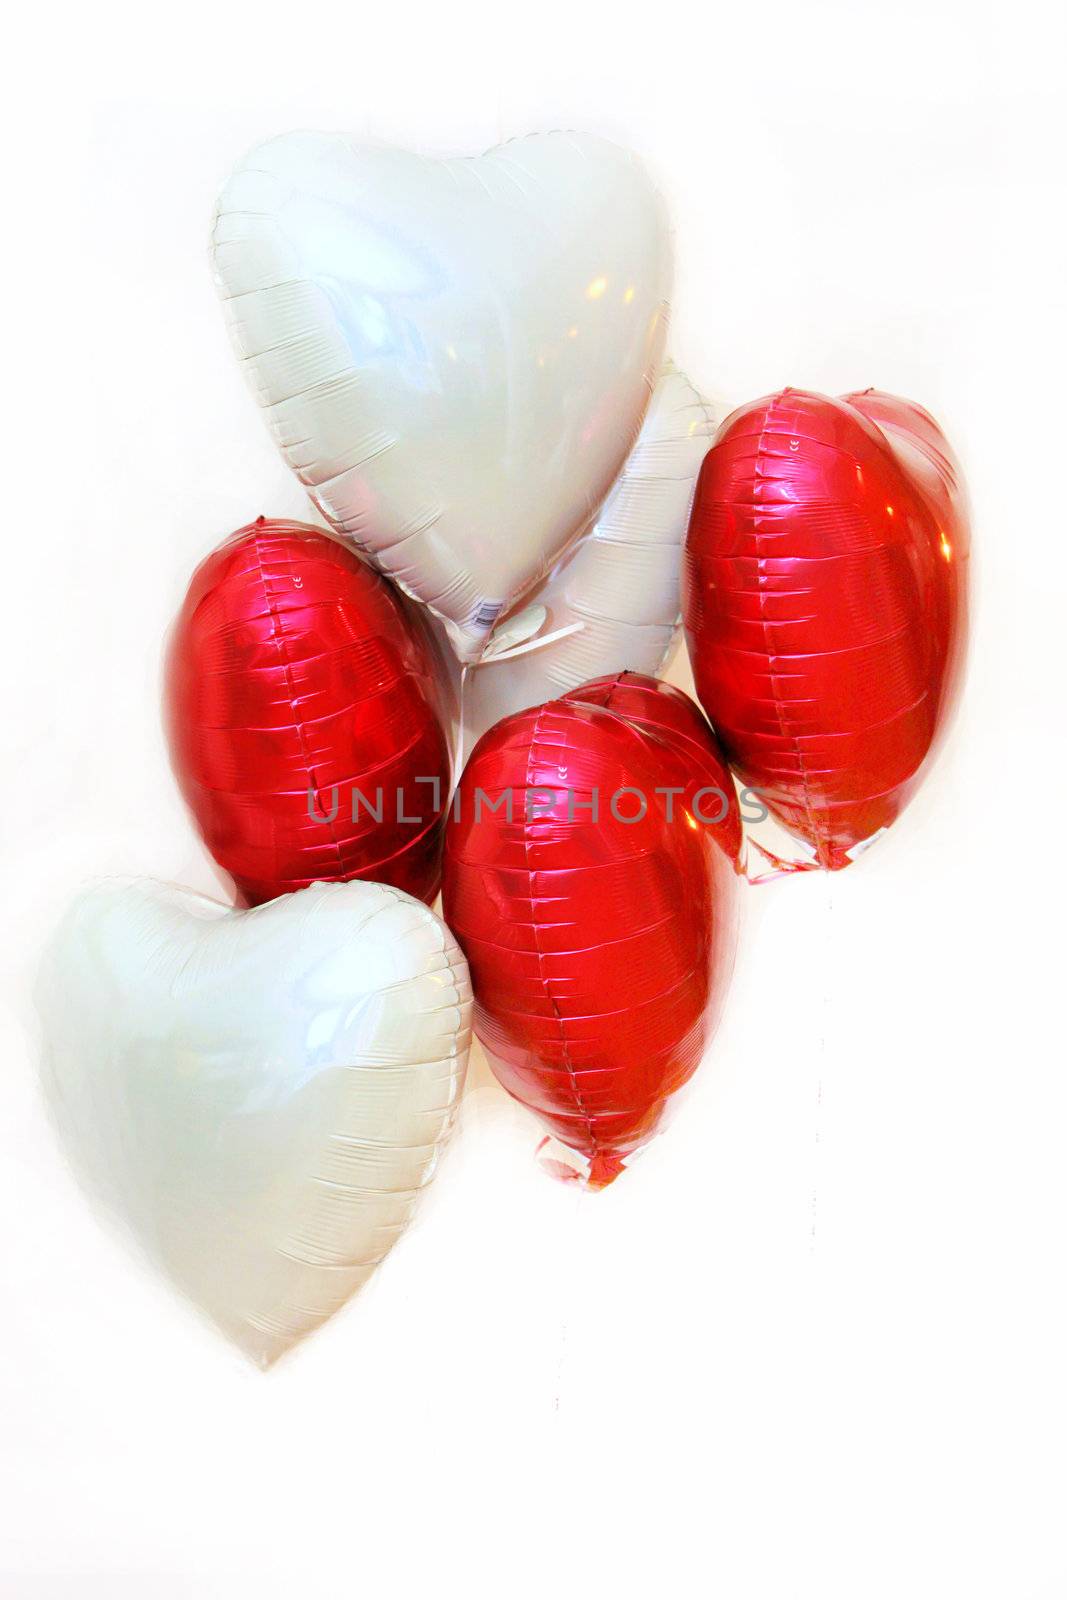 red and white balloons on a white background